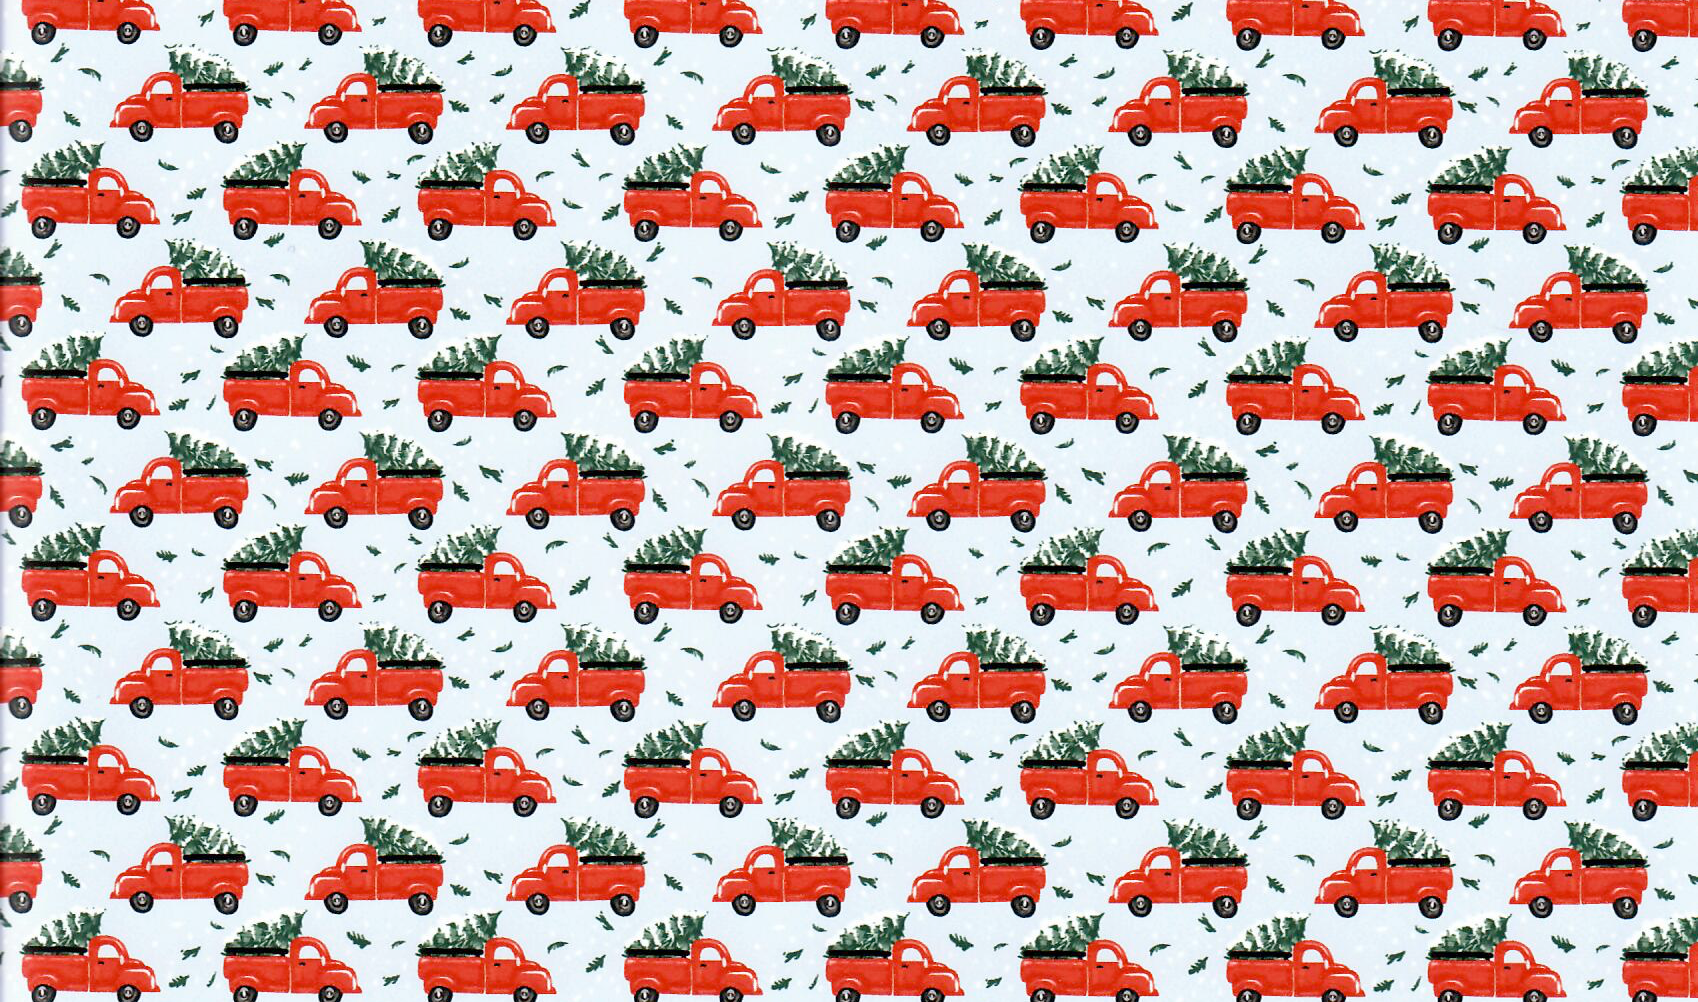 Vintage Red Pickup Truck with Christmas Tree Heat Transfer Vinyl